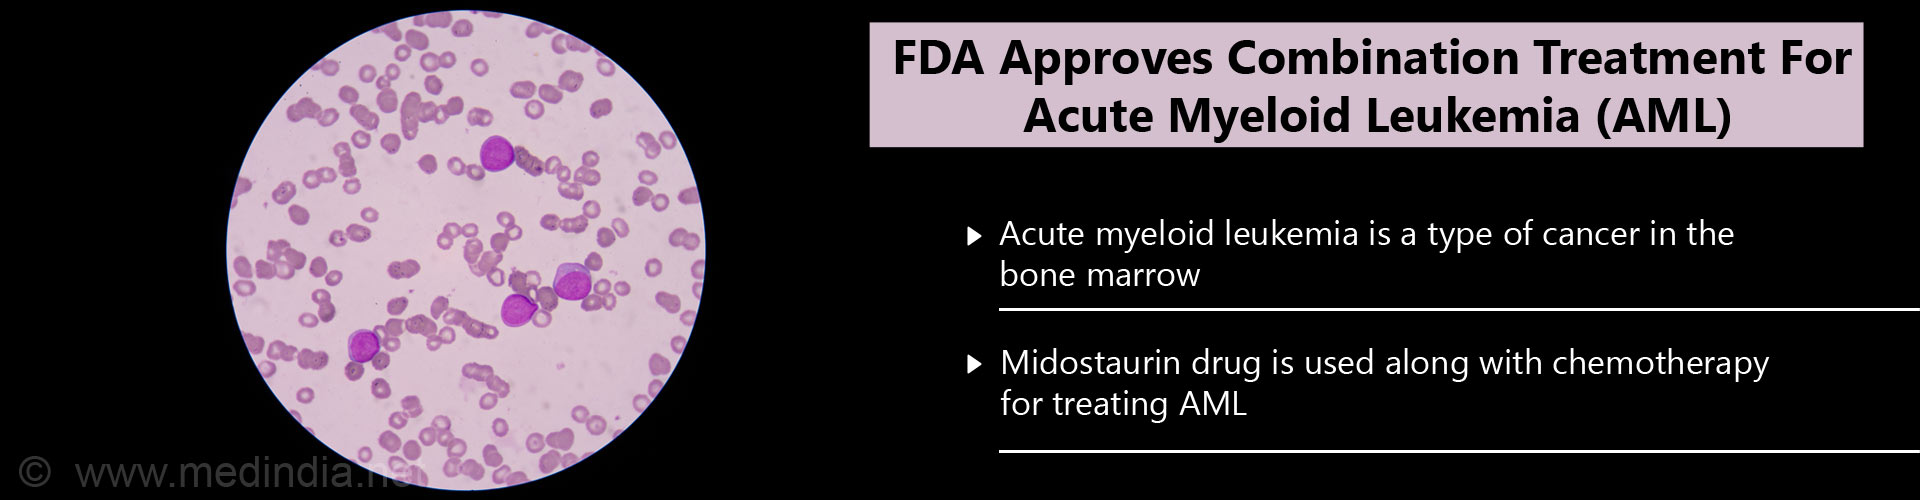 FDA approves combination treatment for acute myeloid leukemia (AML)
- Acute myeloid leukemia (AML) is a tyoe of cancer in the bone marrow
- Midostaurin drug is used along with chemotherapy for treating AML
